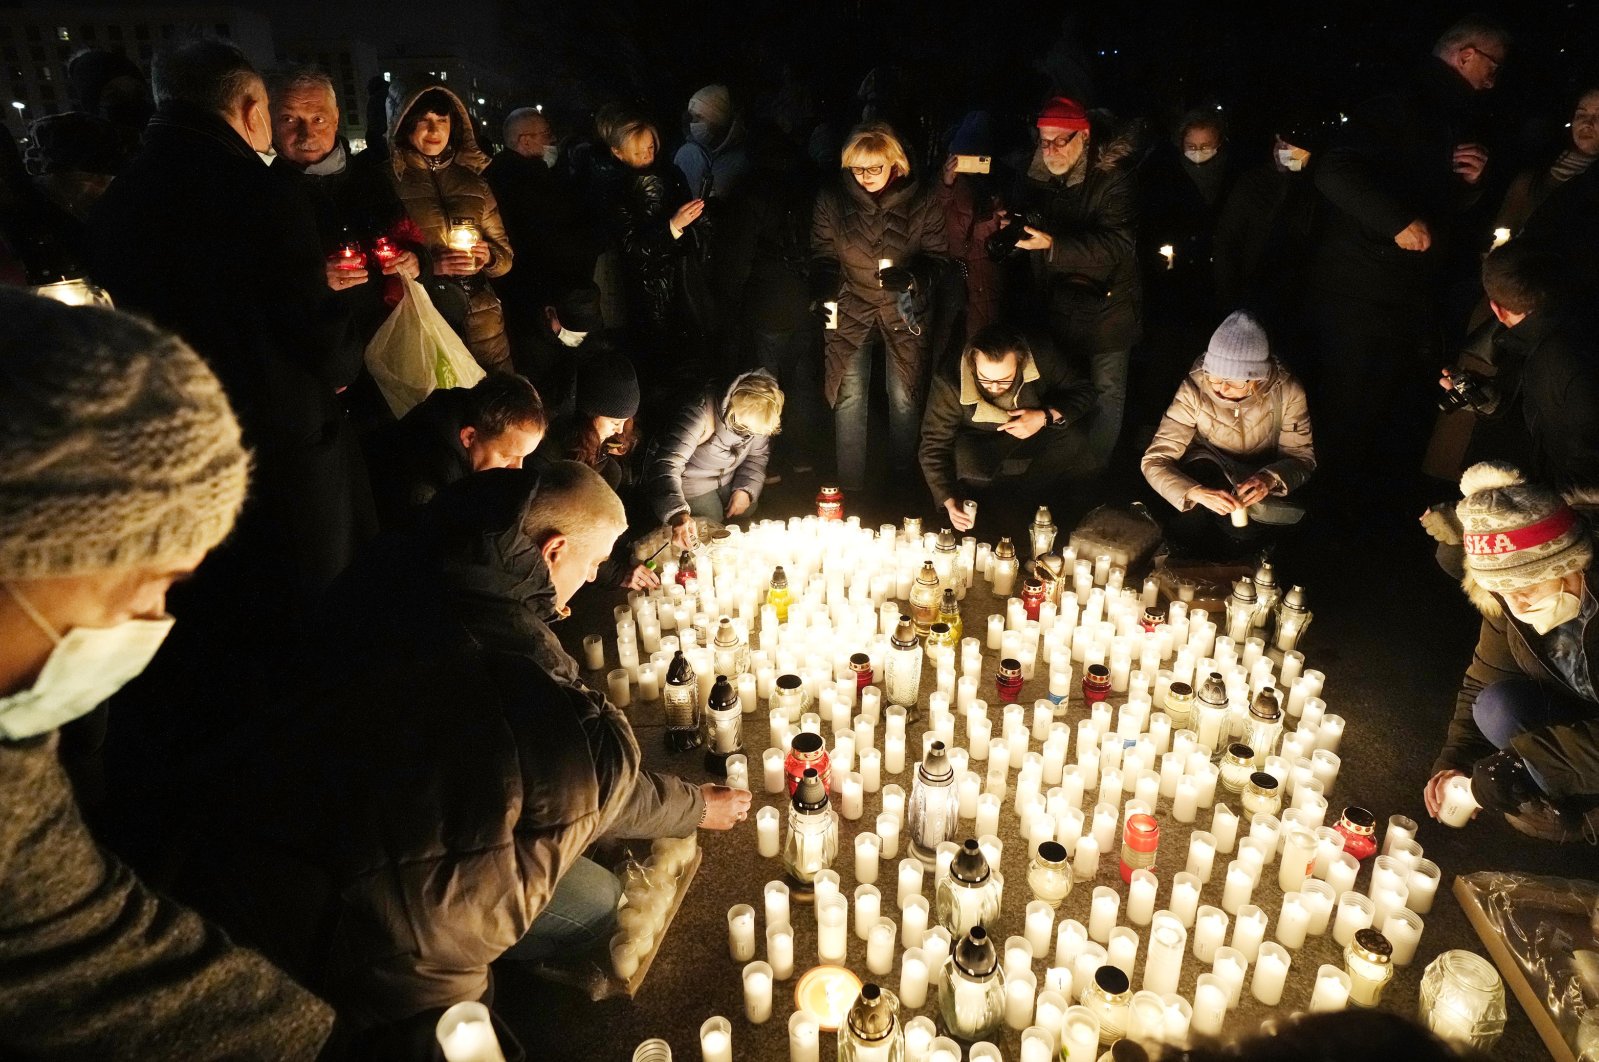 People light candles to commemorate those who who have died from COVID-19 as Poland hit the sad milestone of 100,000 deaths related to the coronavirus, in Warsaw, Poland, Jan. 11, 2022. (AP Photo)